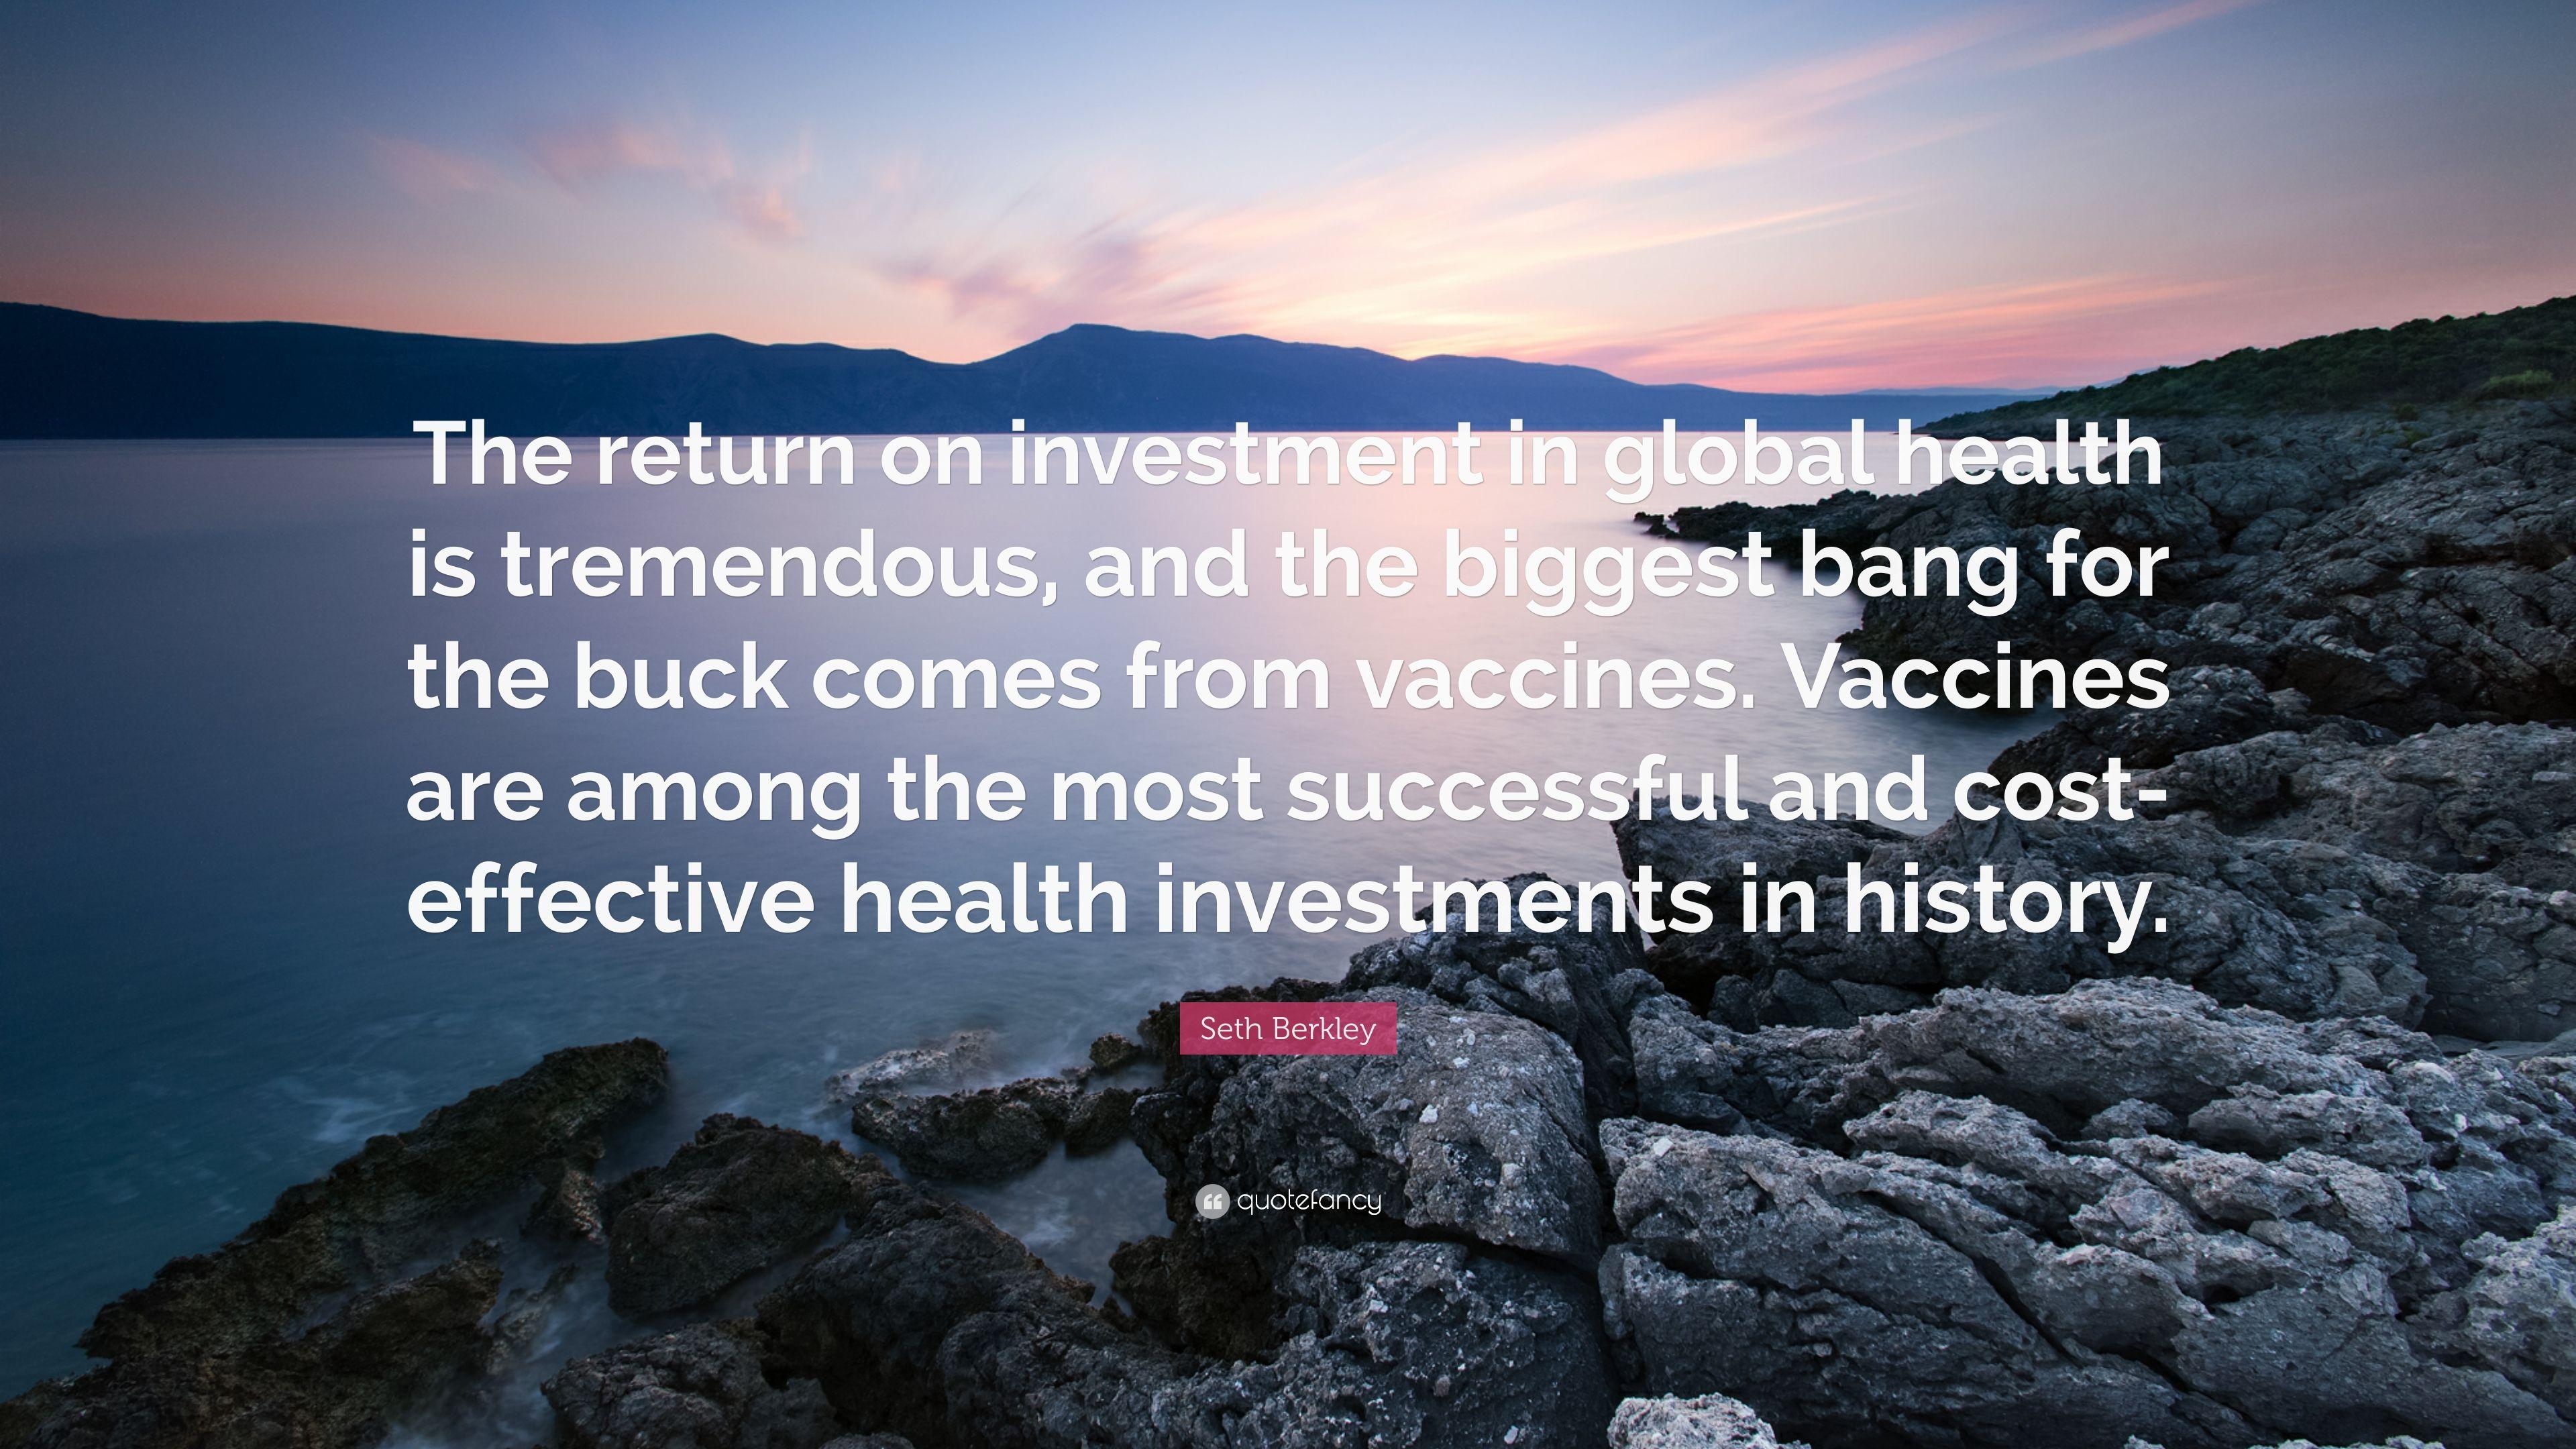 Seth Berkley Quote: “The return on investment in global health is